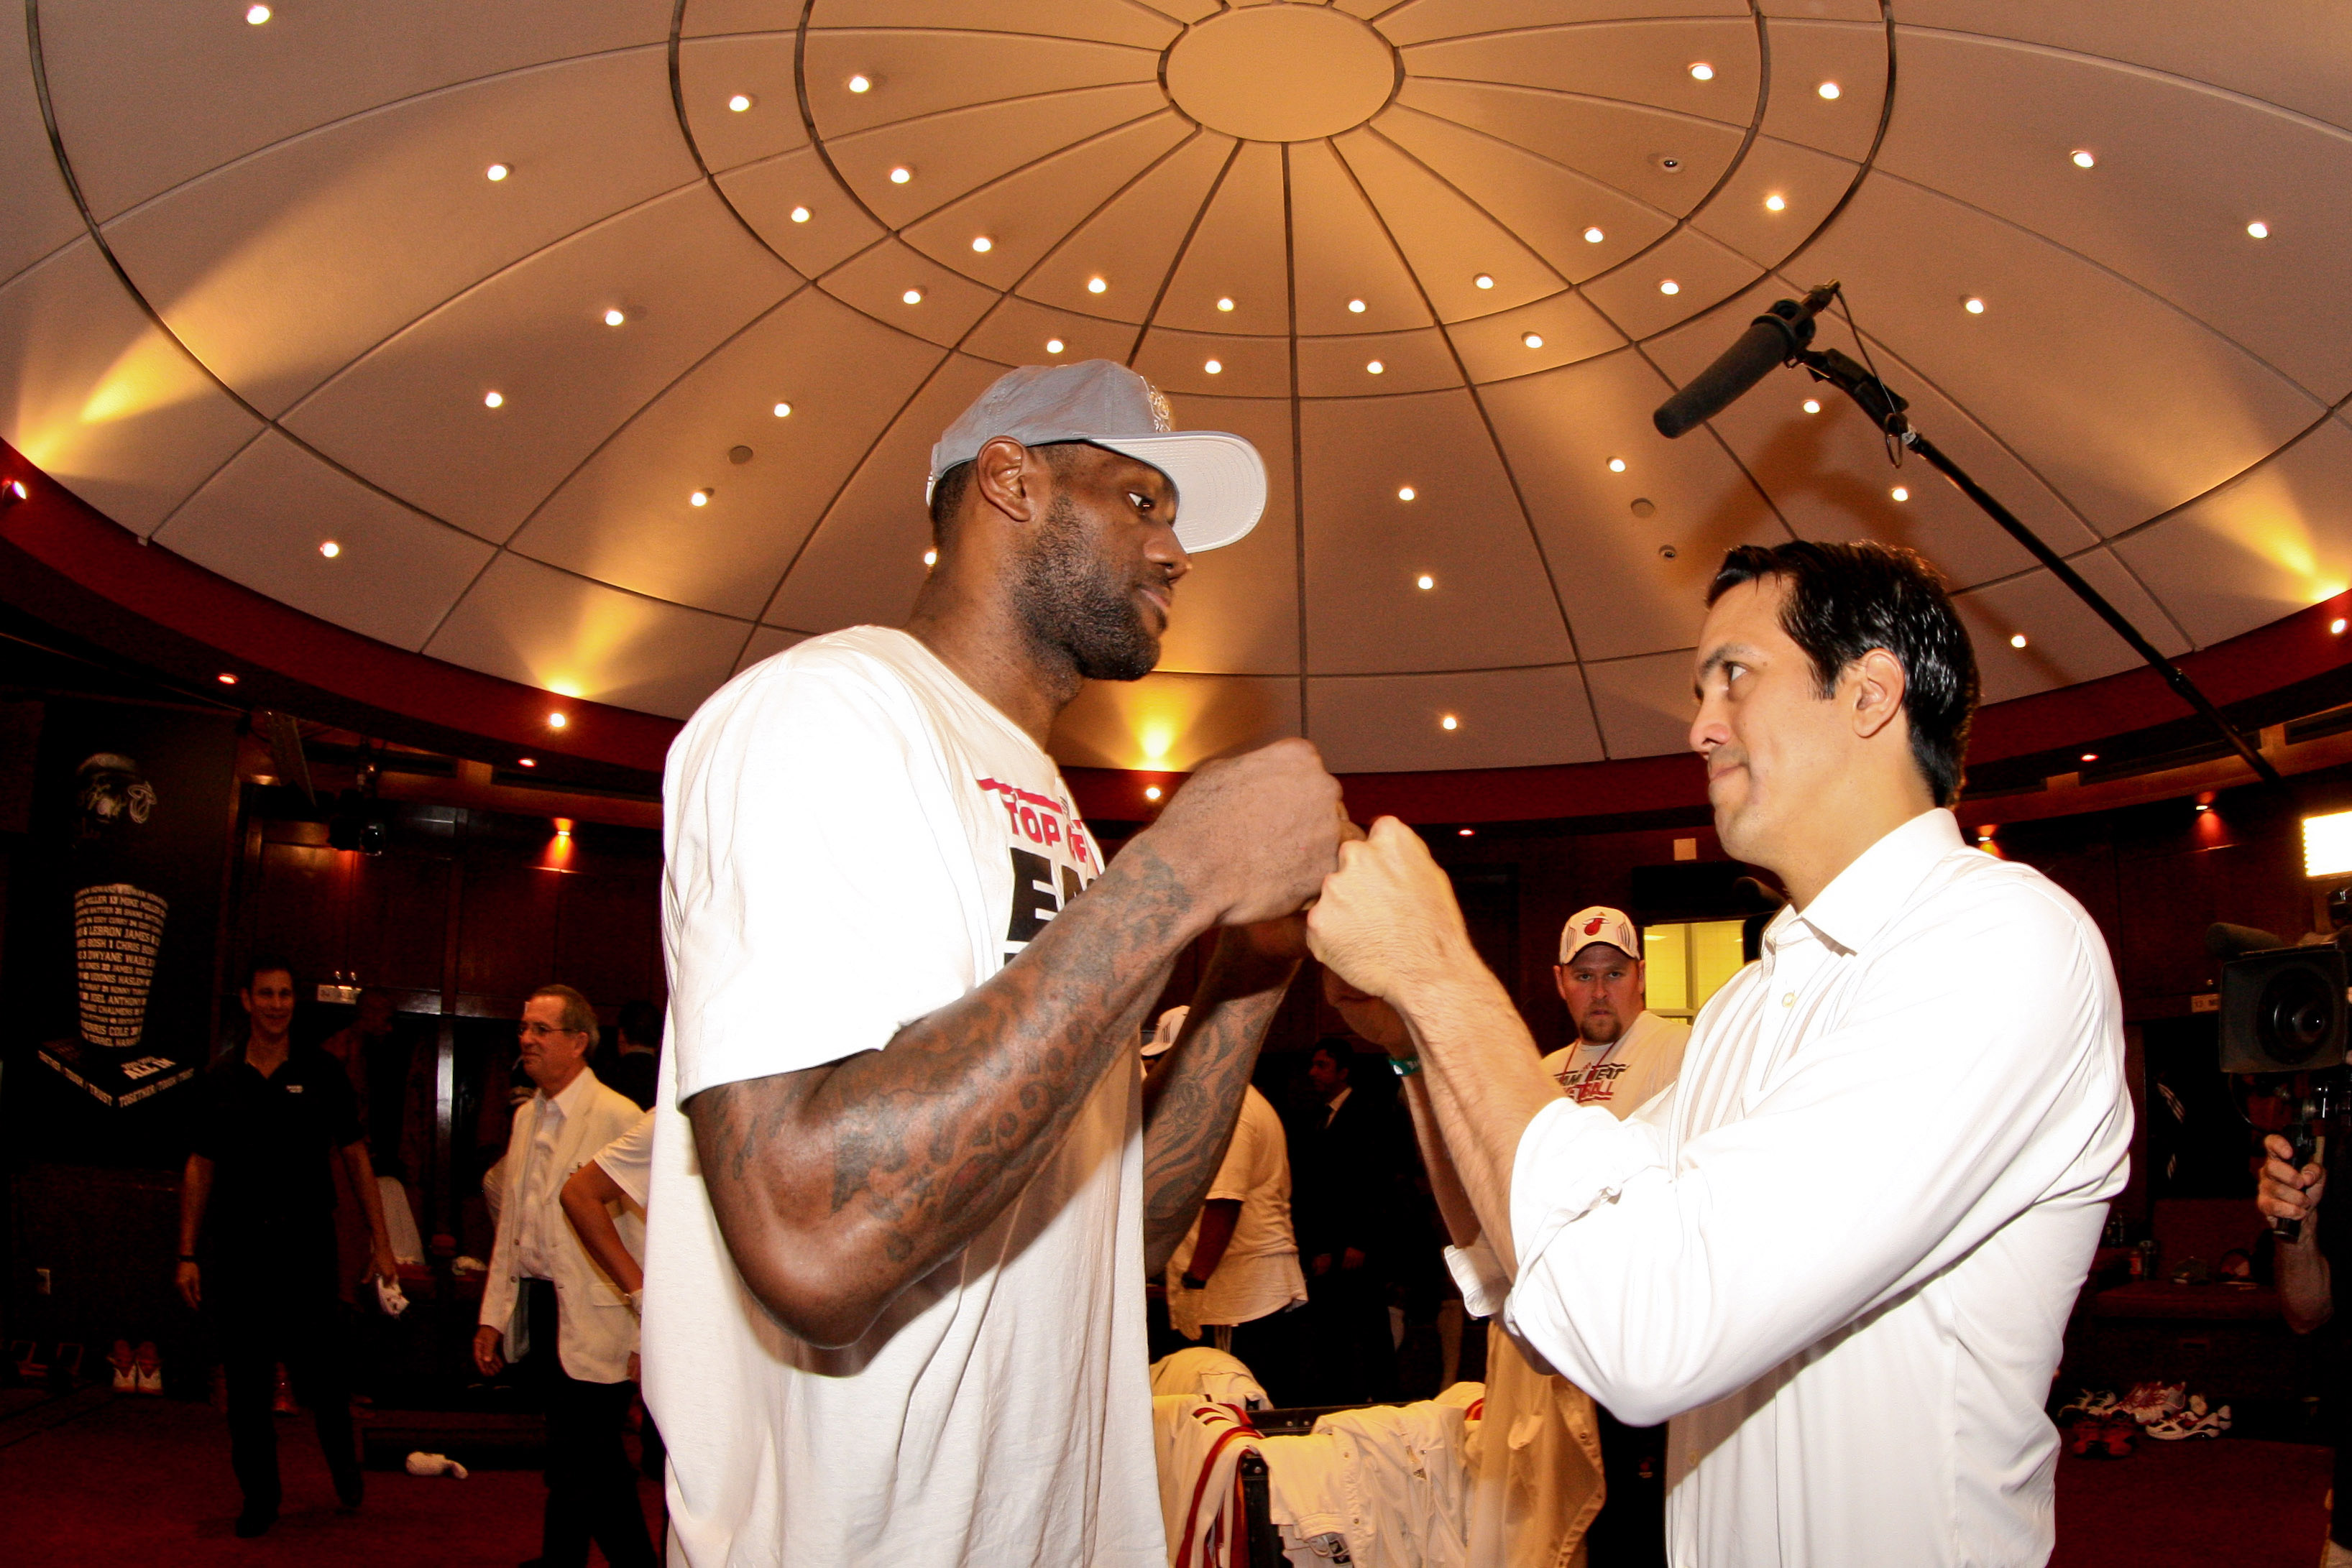 Is spoelstra a good coach of fame